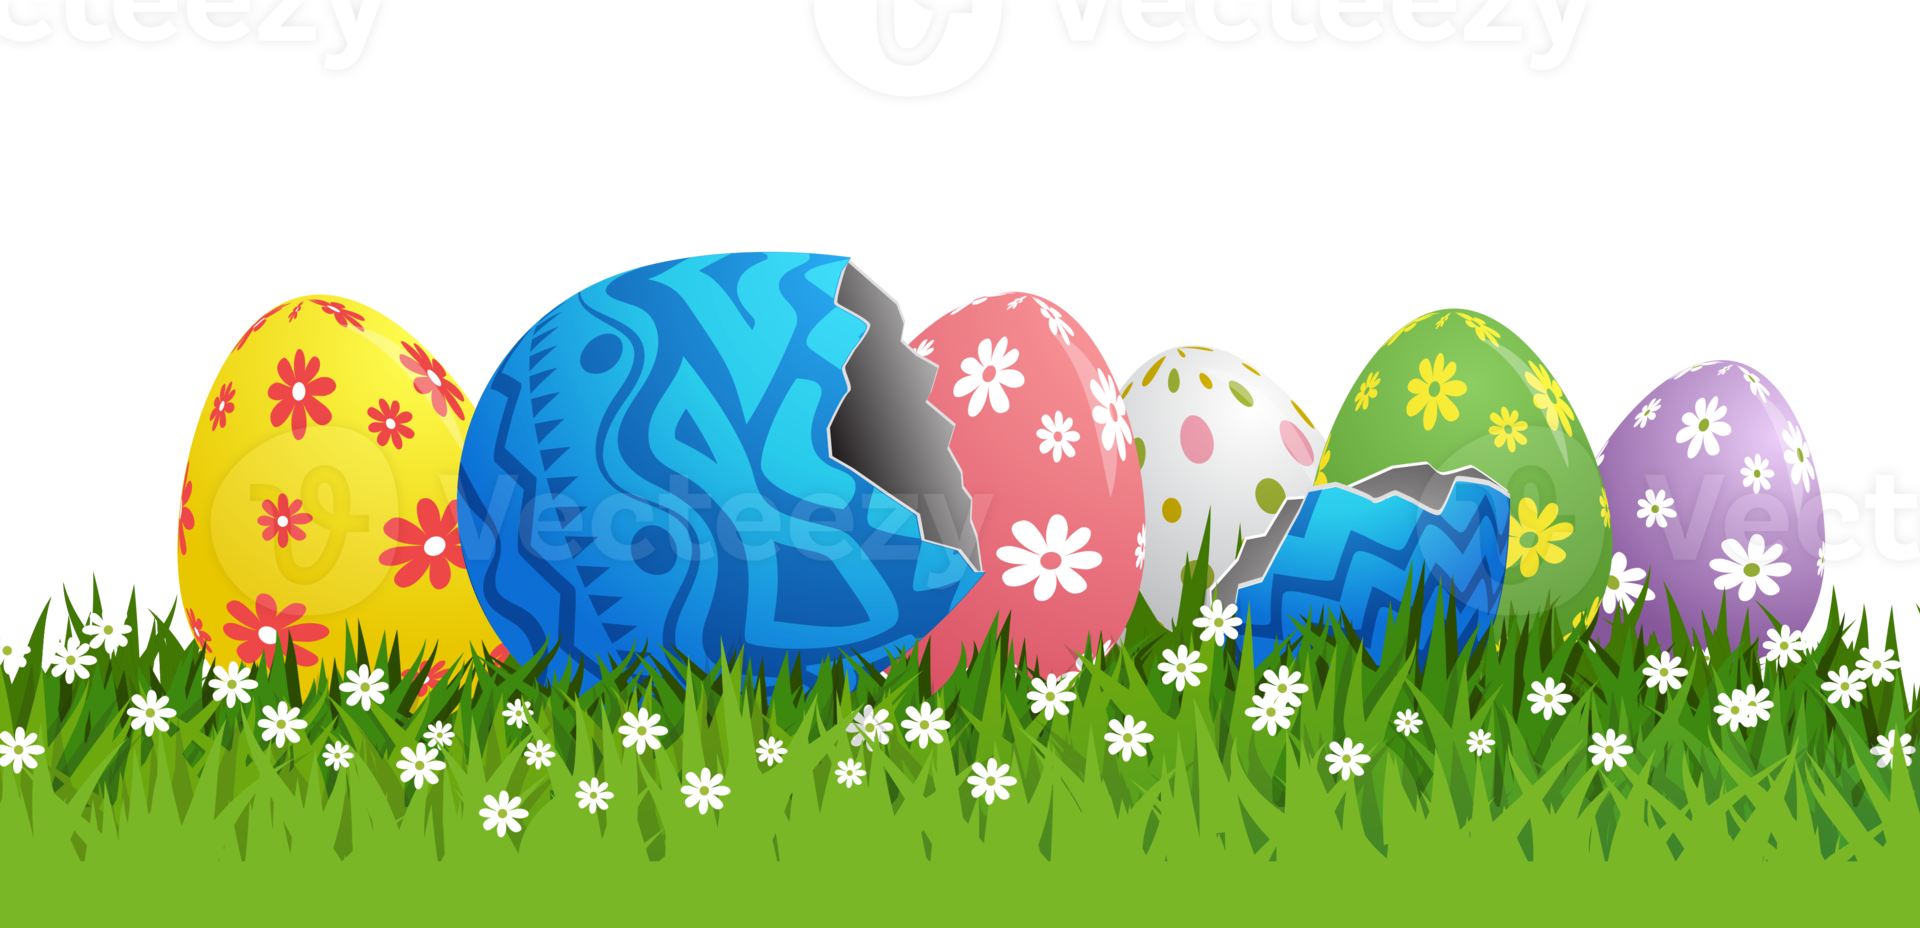 Easter eggs on grass png